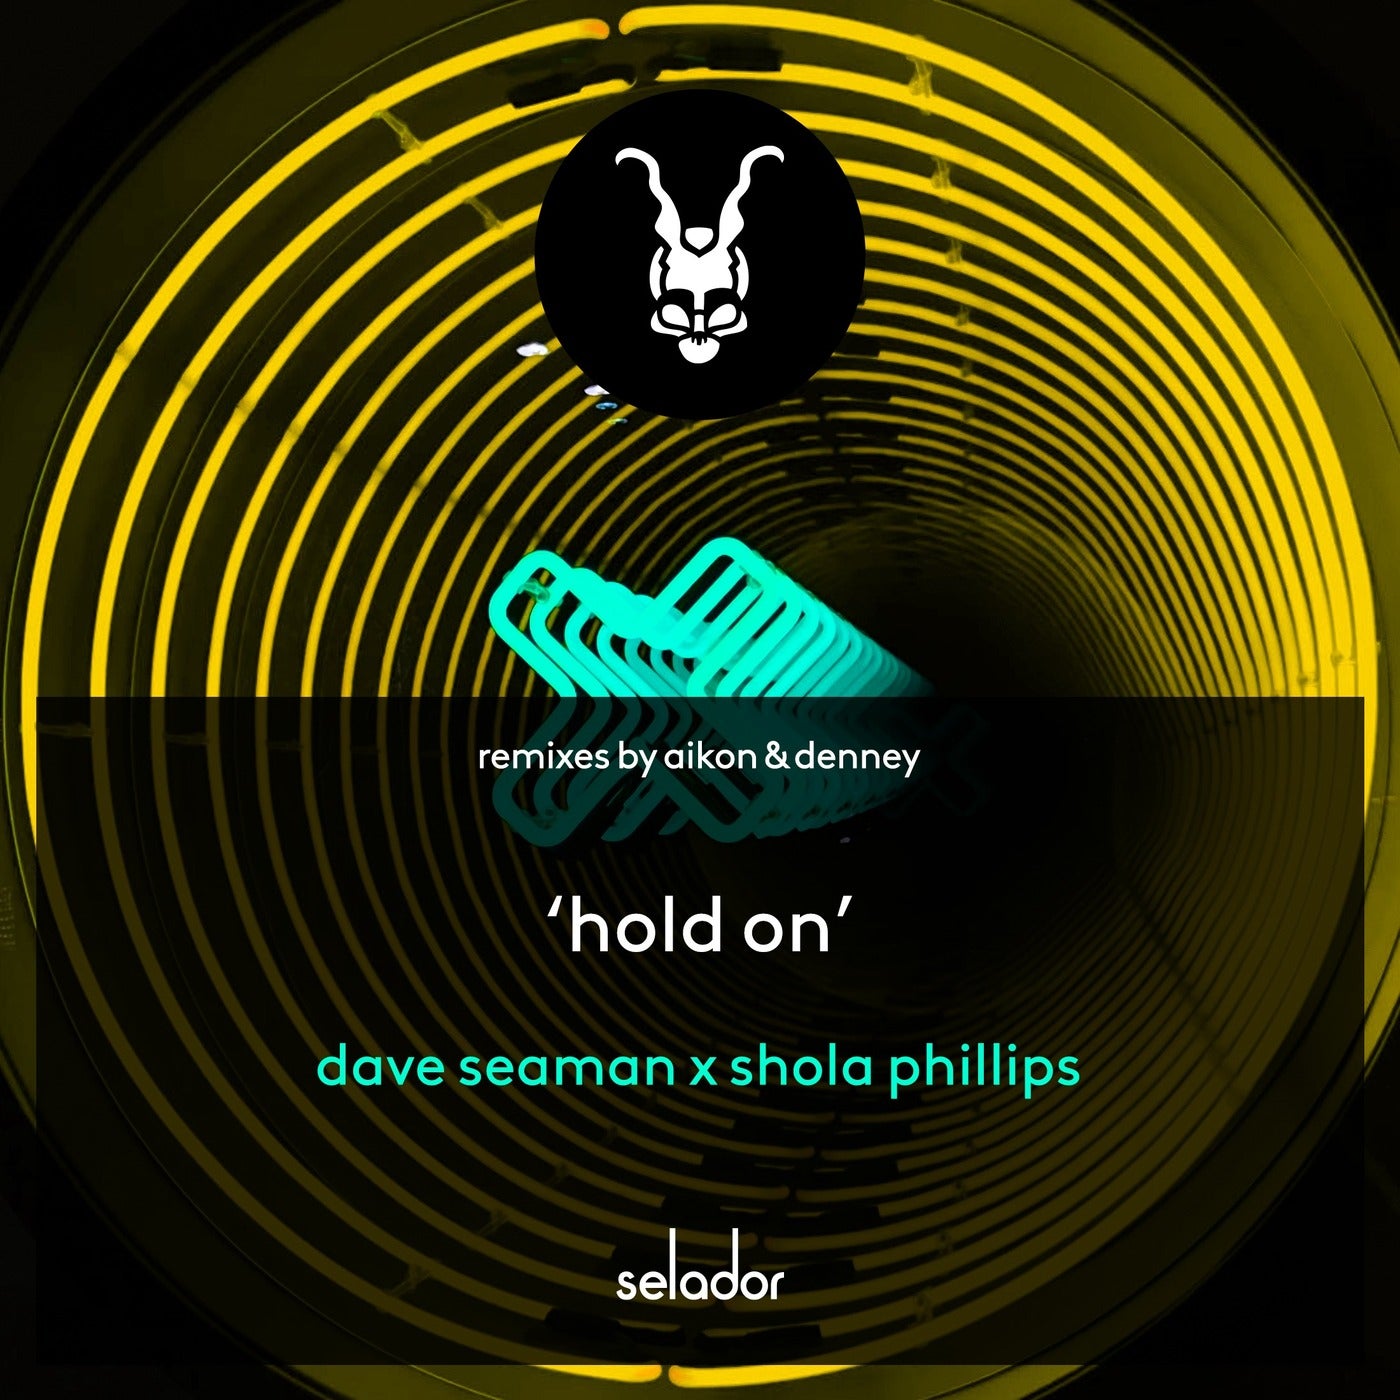 image cover: Dave Seaman, Shola Phillips - Hold On (The Remixes) on Selador